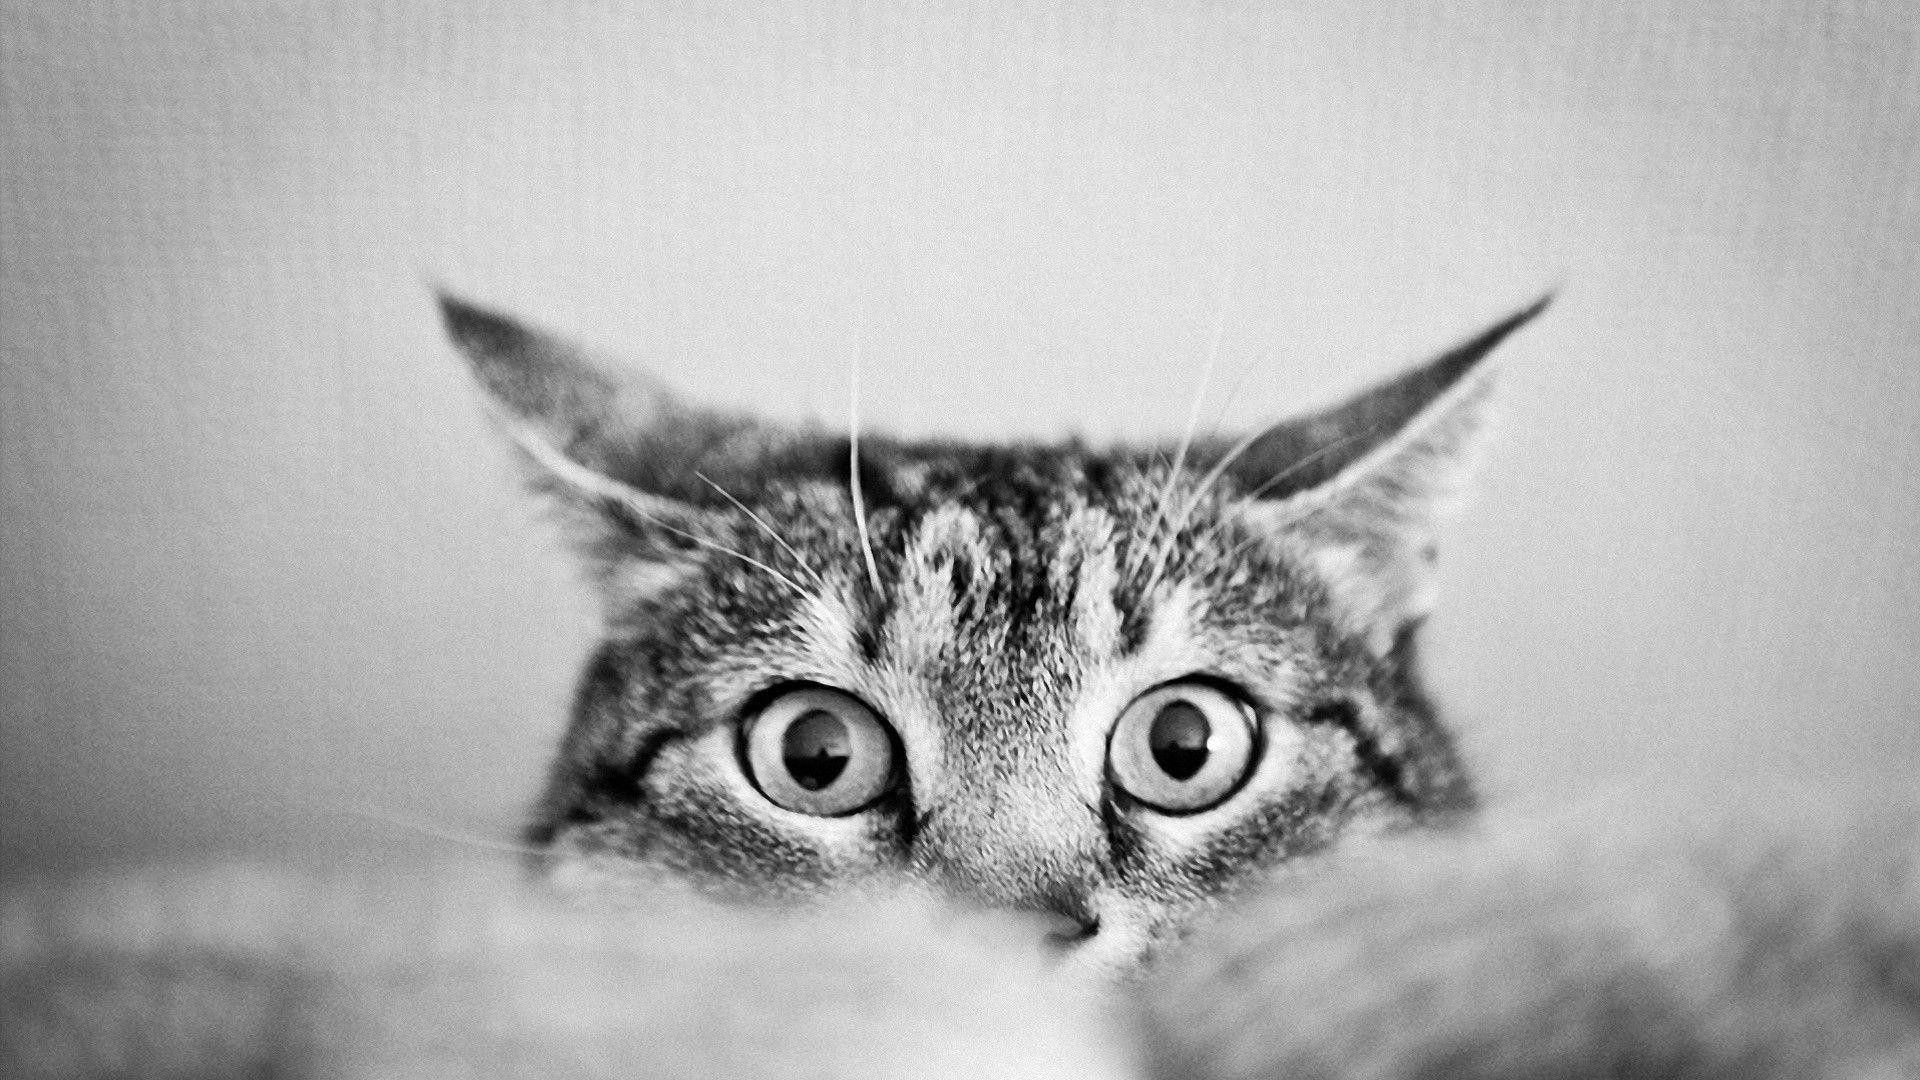 Black And White Wallpapers Of Cats Wallpaper Cave